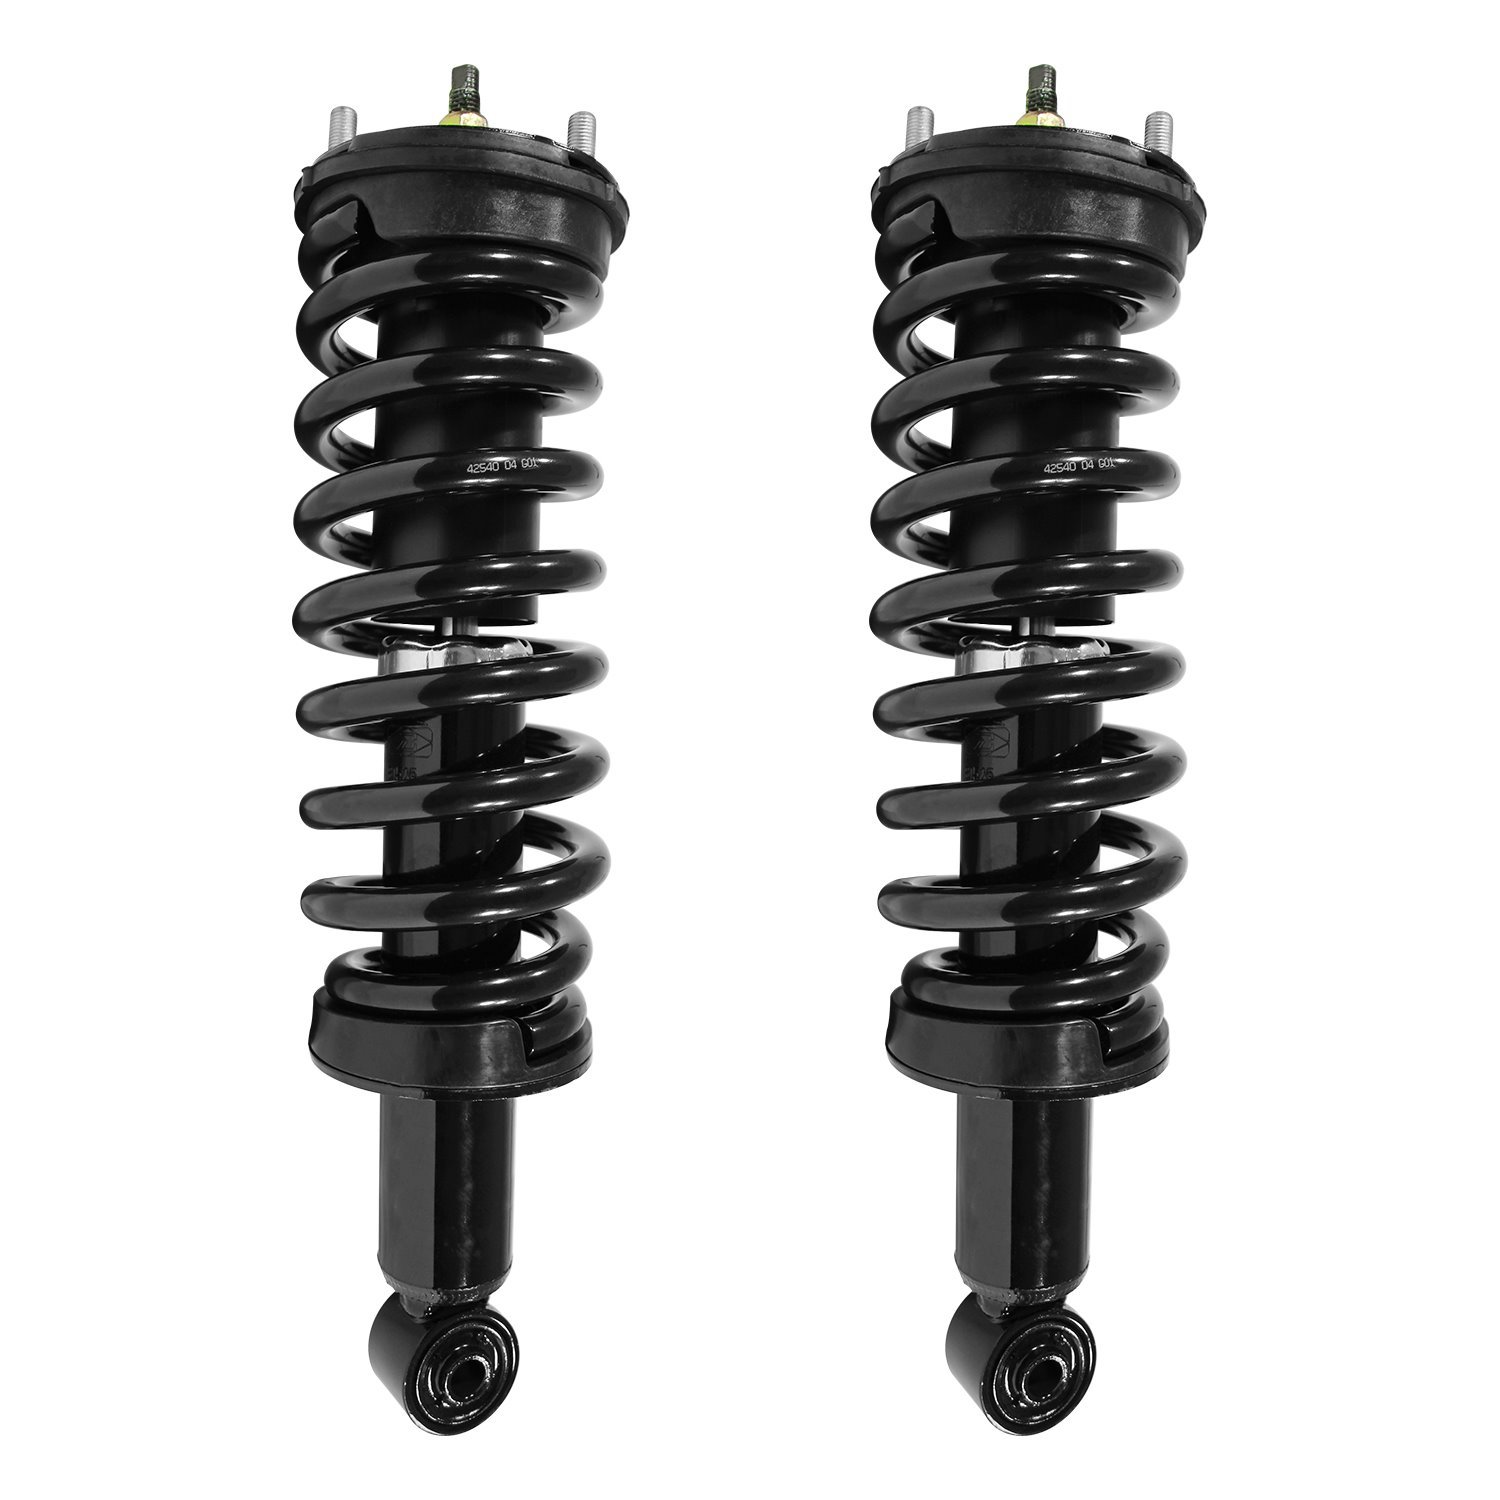 2-11570-001 Suspension Strut & Coil Spring Assembly Set Fits Select Chevy Colorado, GMC Canyon